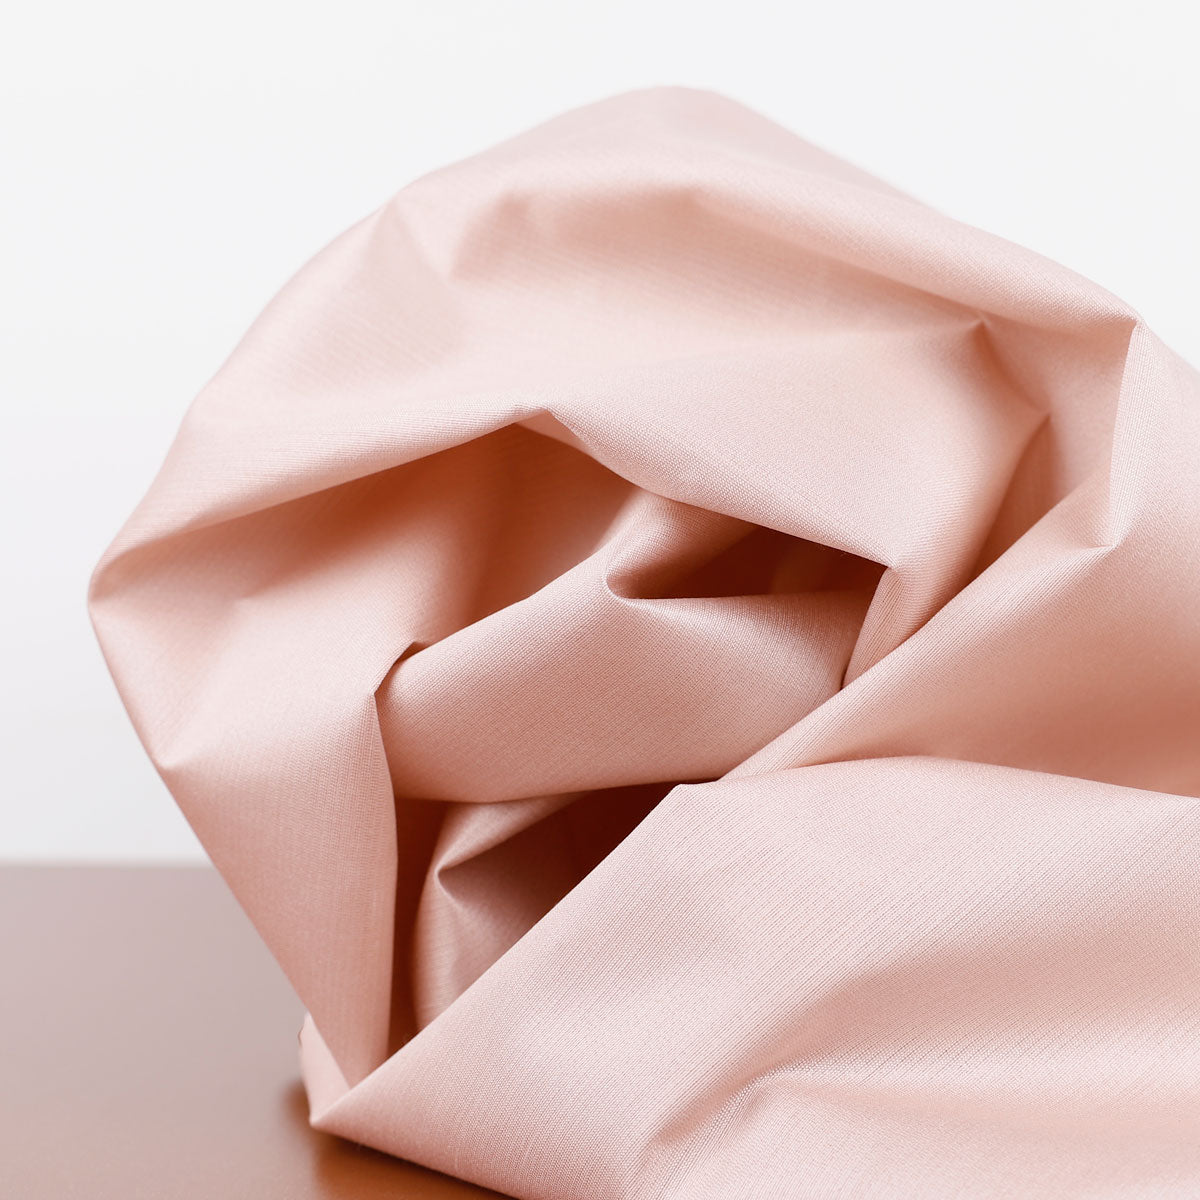 Silk and Polyester Blend Fabric -  Canada